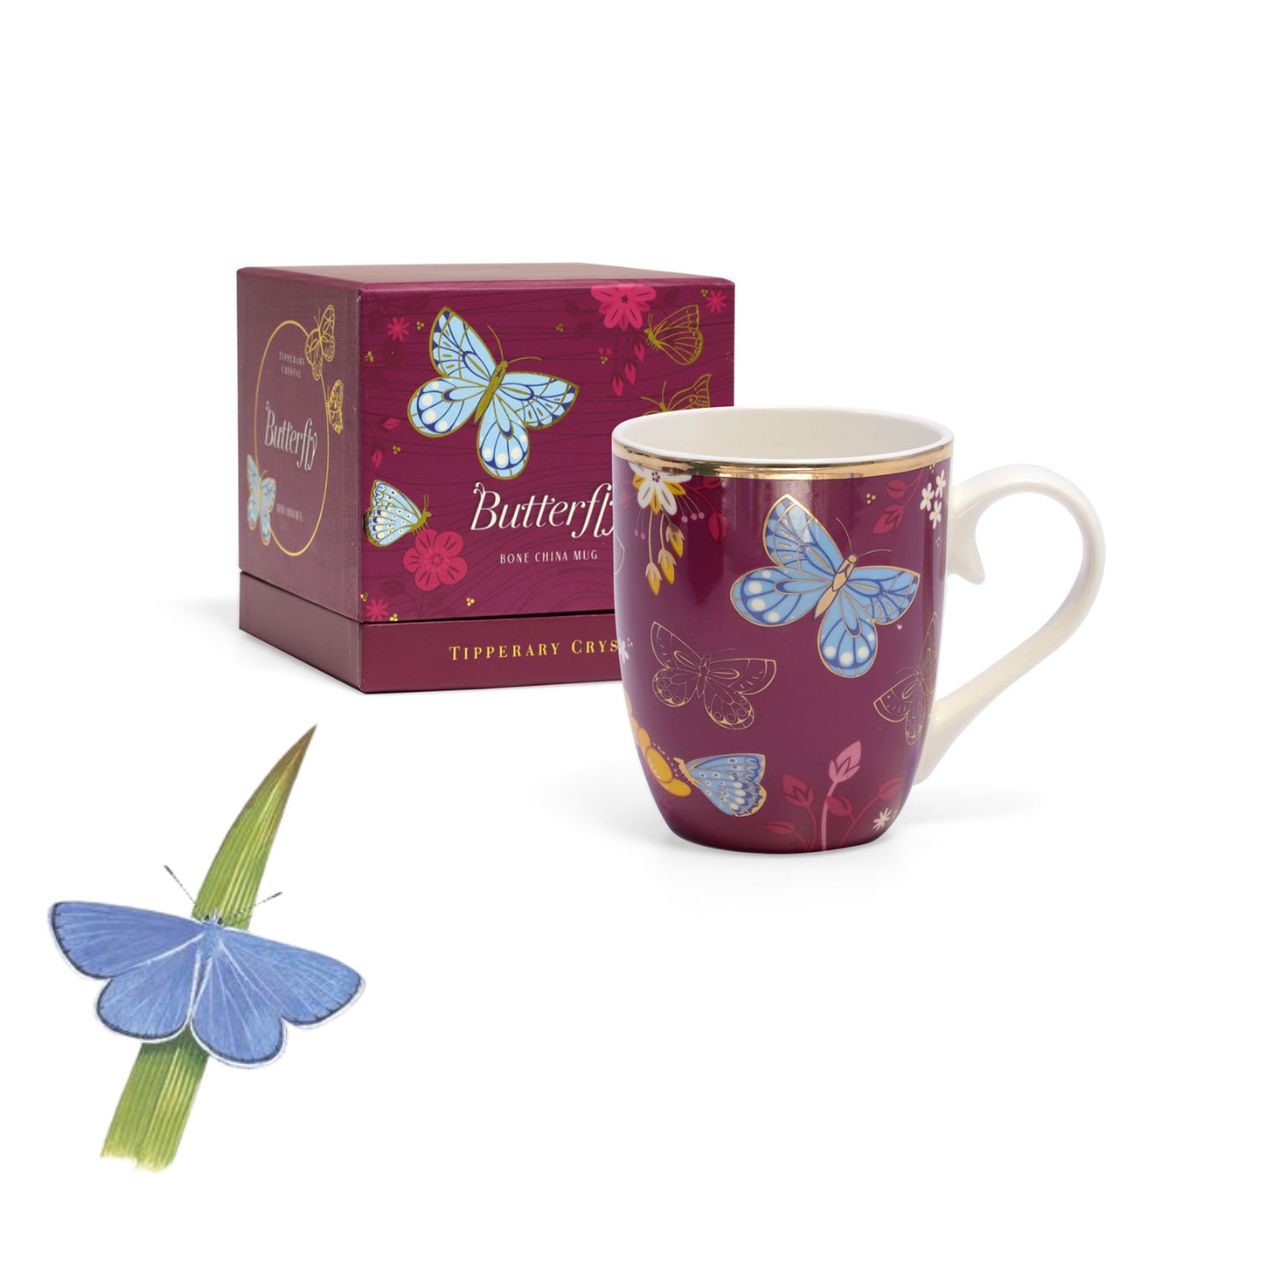 Tipperary Crystal Single Butterfly Mug - The Common Blue  Drawing inspiration from urban garden, the Tipperary Crystal Butterfly collection transforms an icon into something modern and unexpected. Playful and elegant, this collection draws from the inherent beauty of the butterfly.